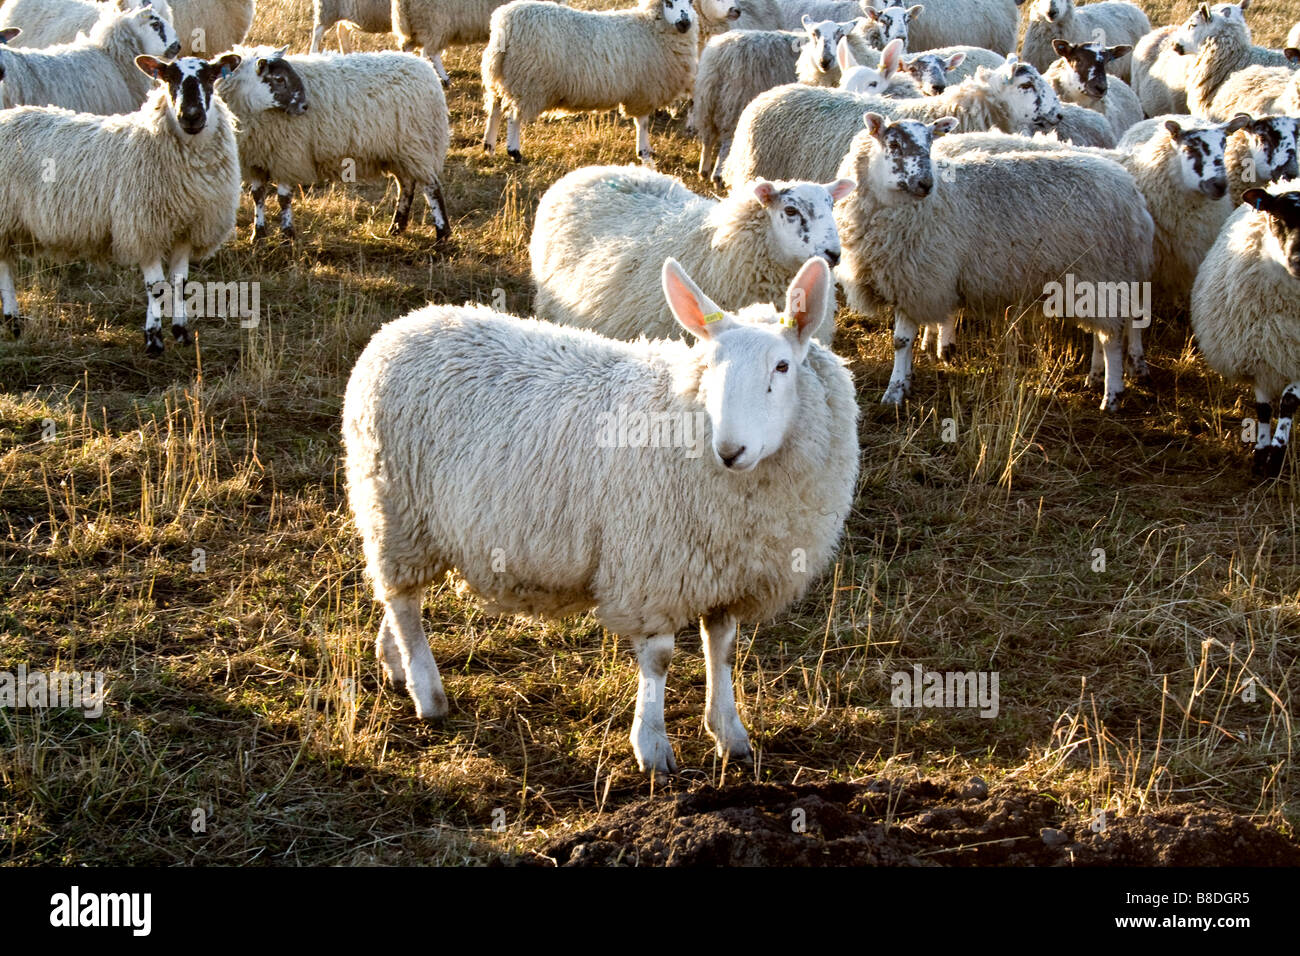 One long eared sheep in a flock of white sheep in a field in Scotland Stock Photo